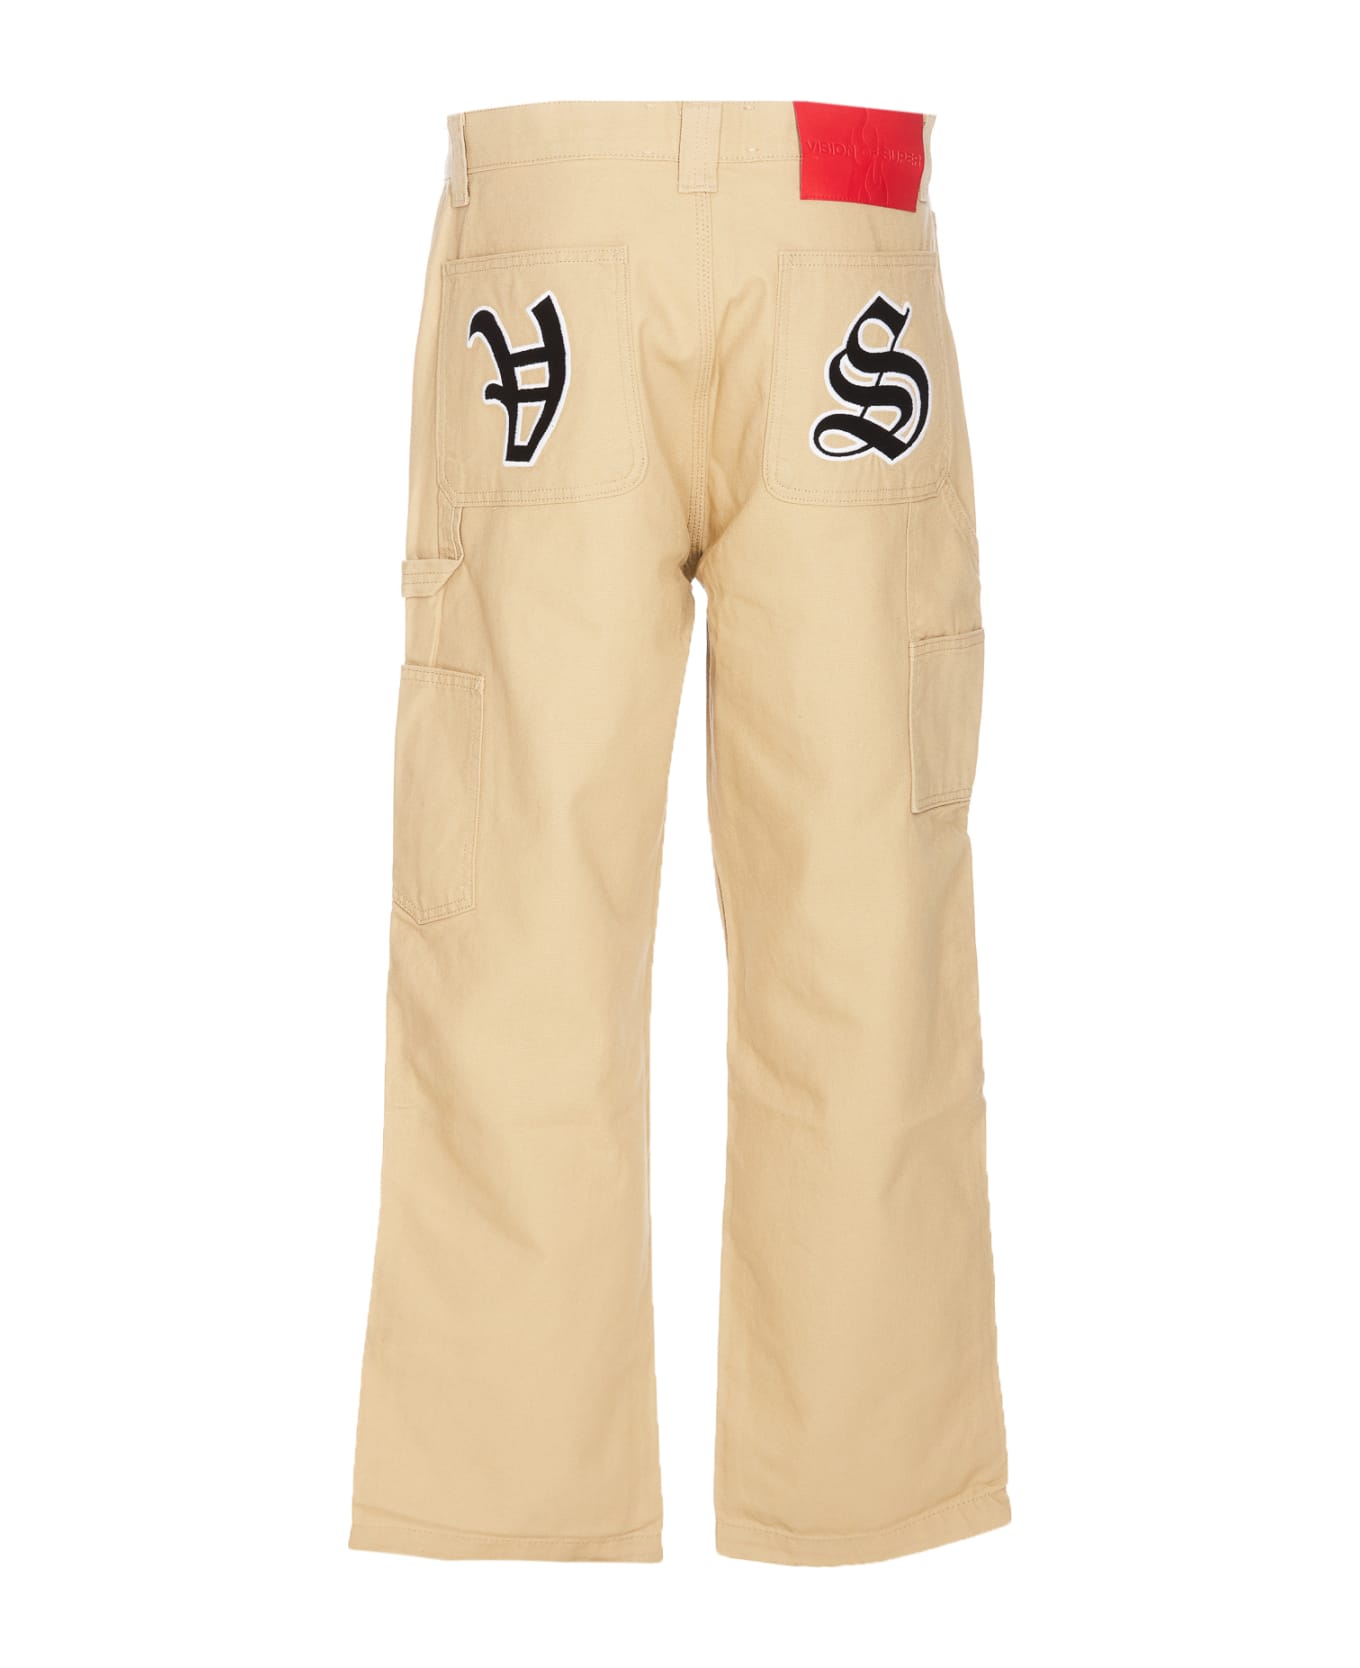 Vision of Super Sand Worker Pants With V-s Gothic Patches - NEUTRALS ボトムス